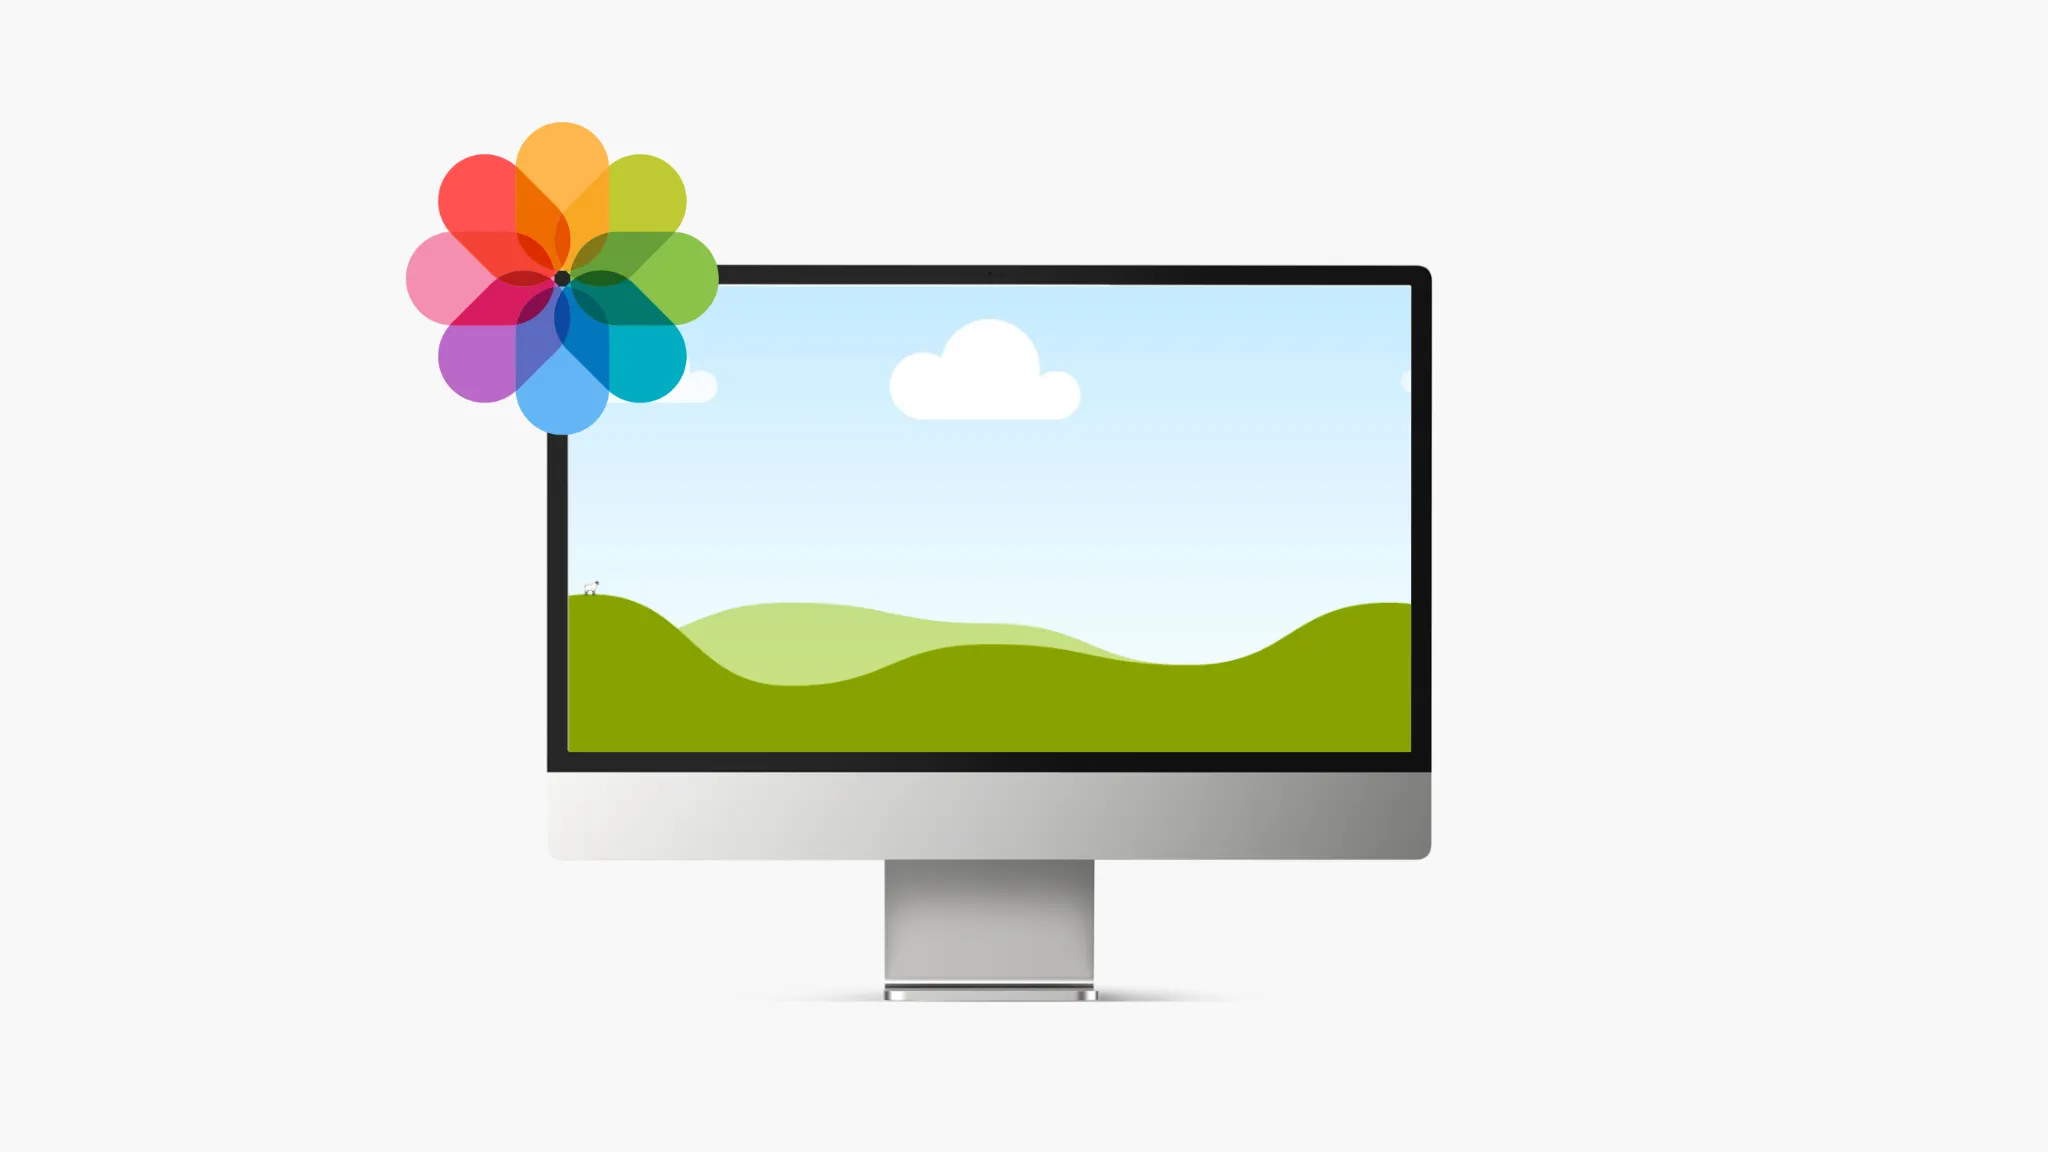 iPhoto installed on your Mac